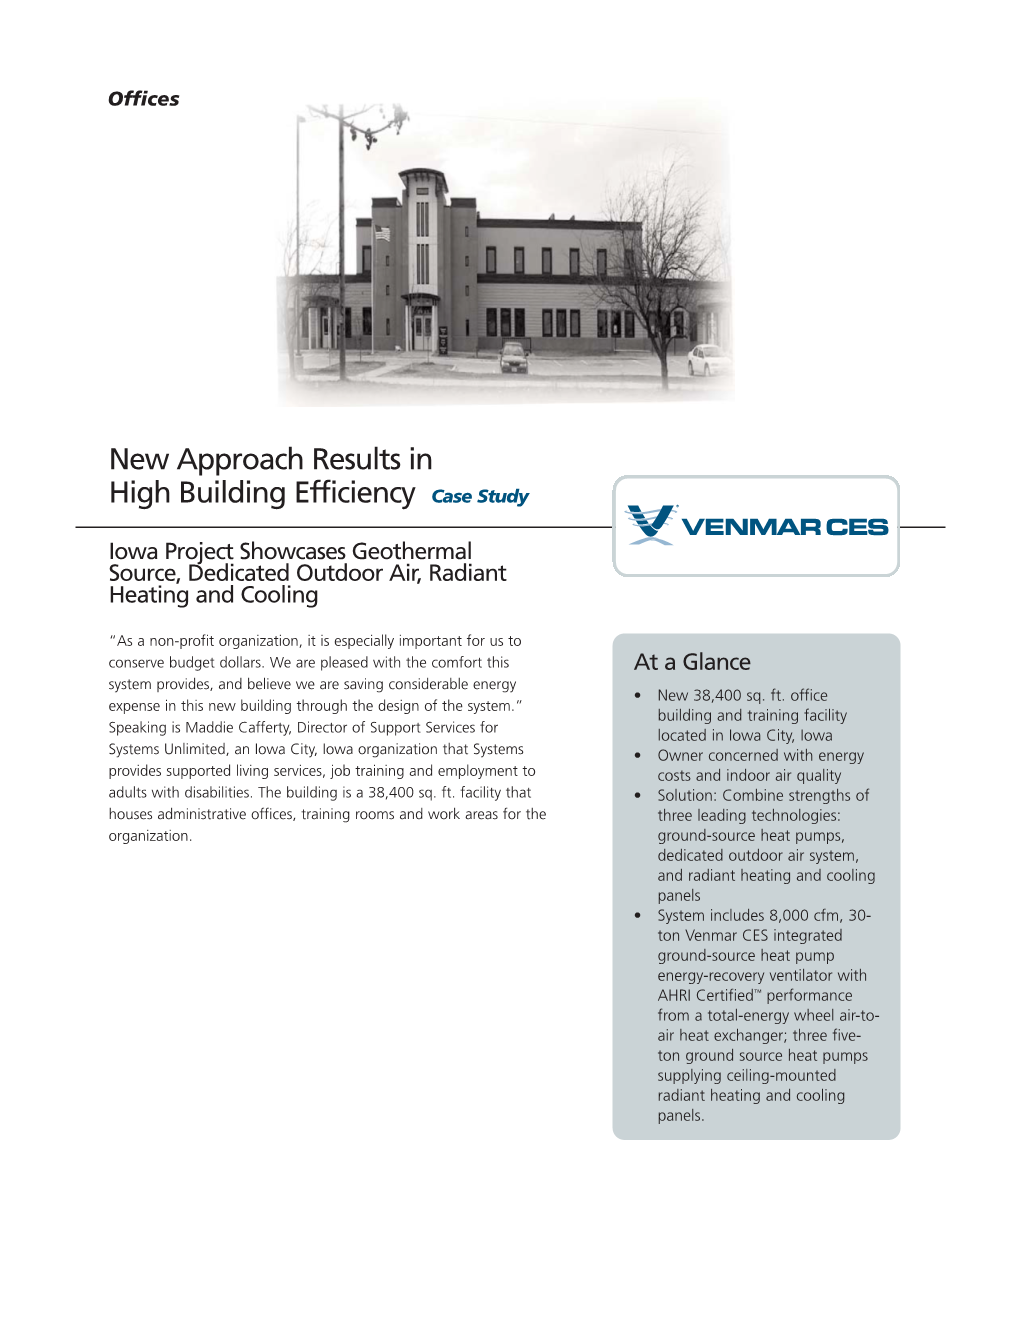 New Approach Results in High Building Efficiency Case Study